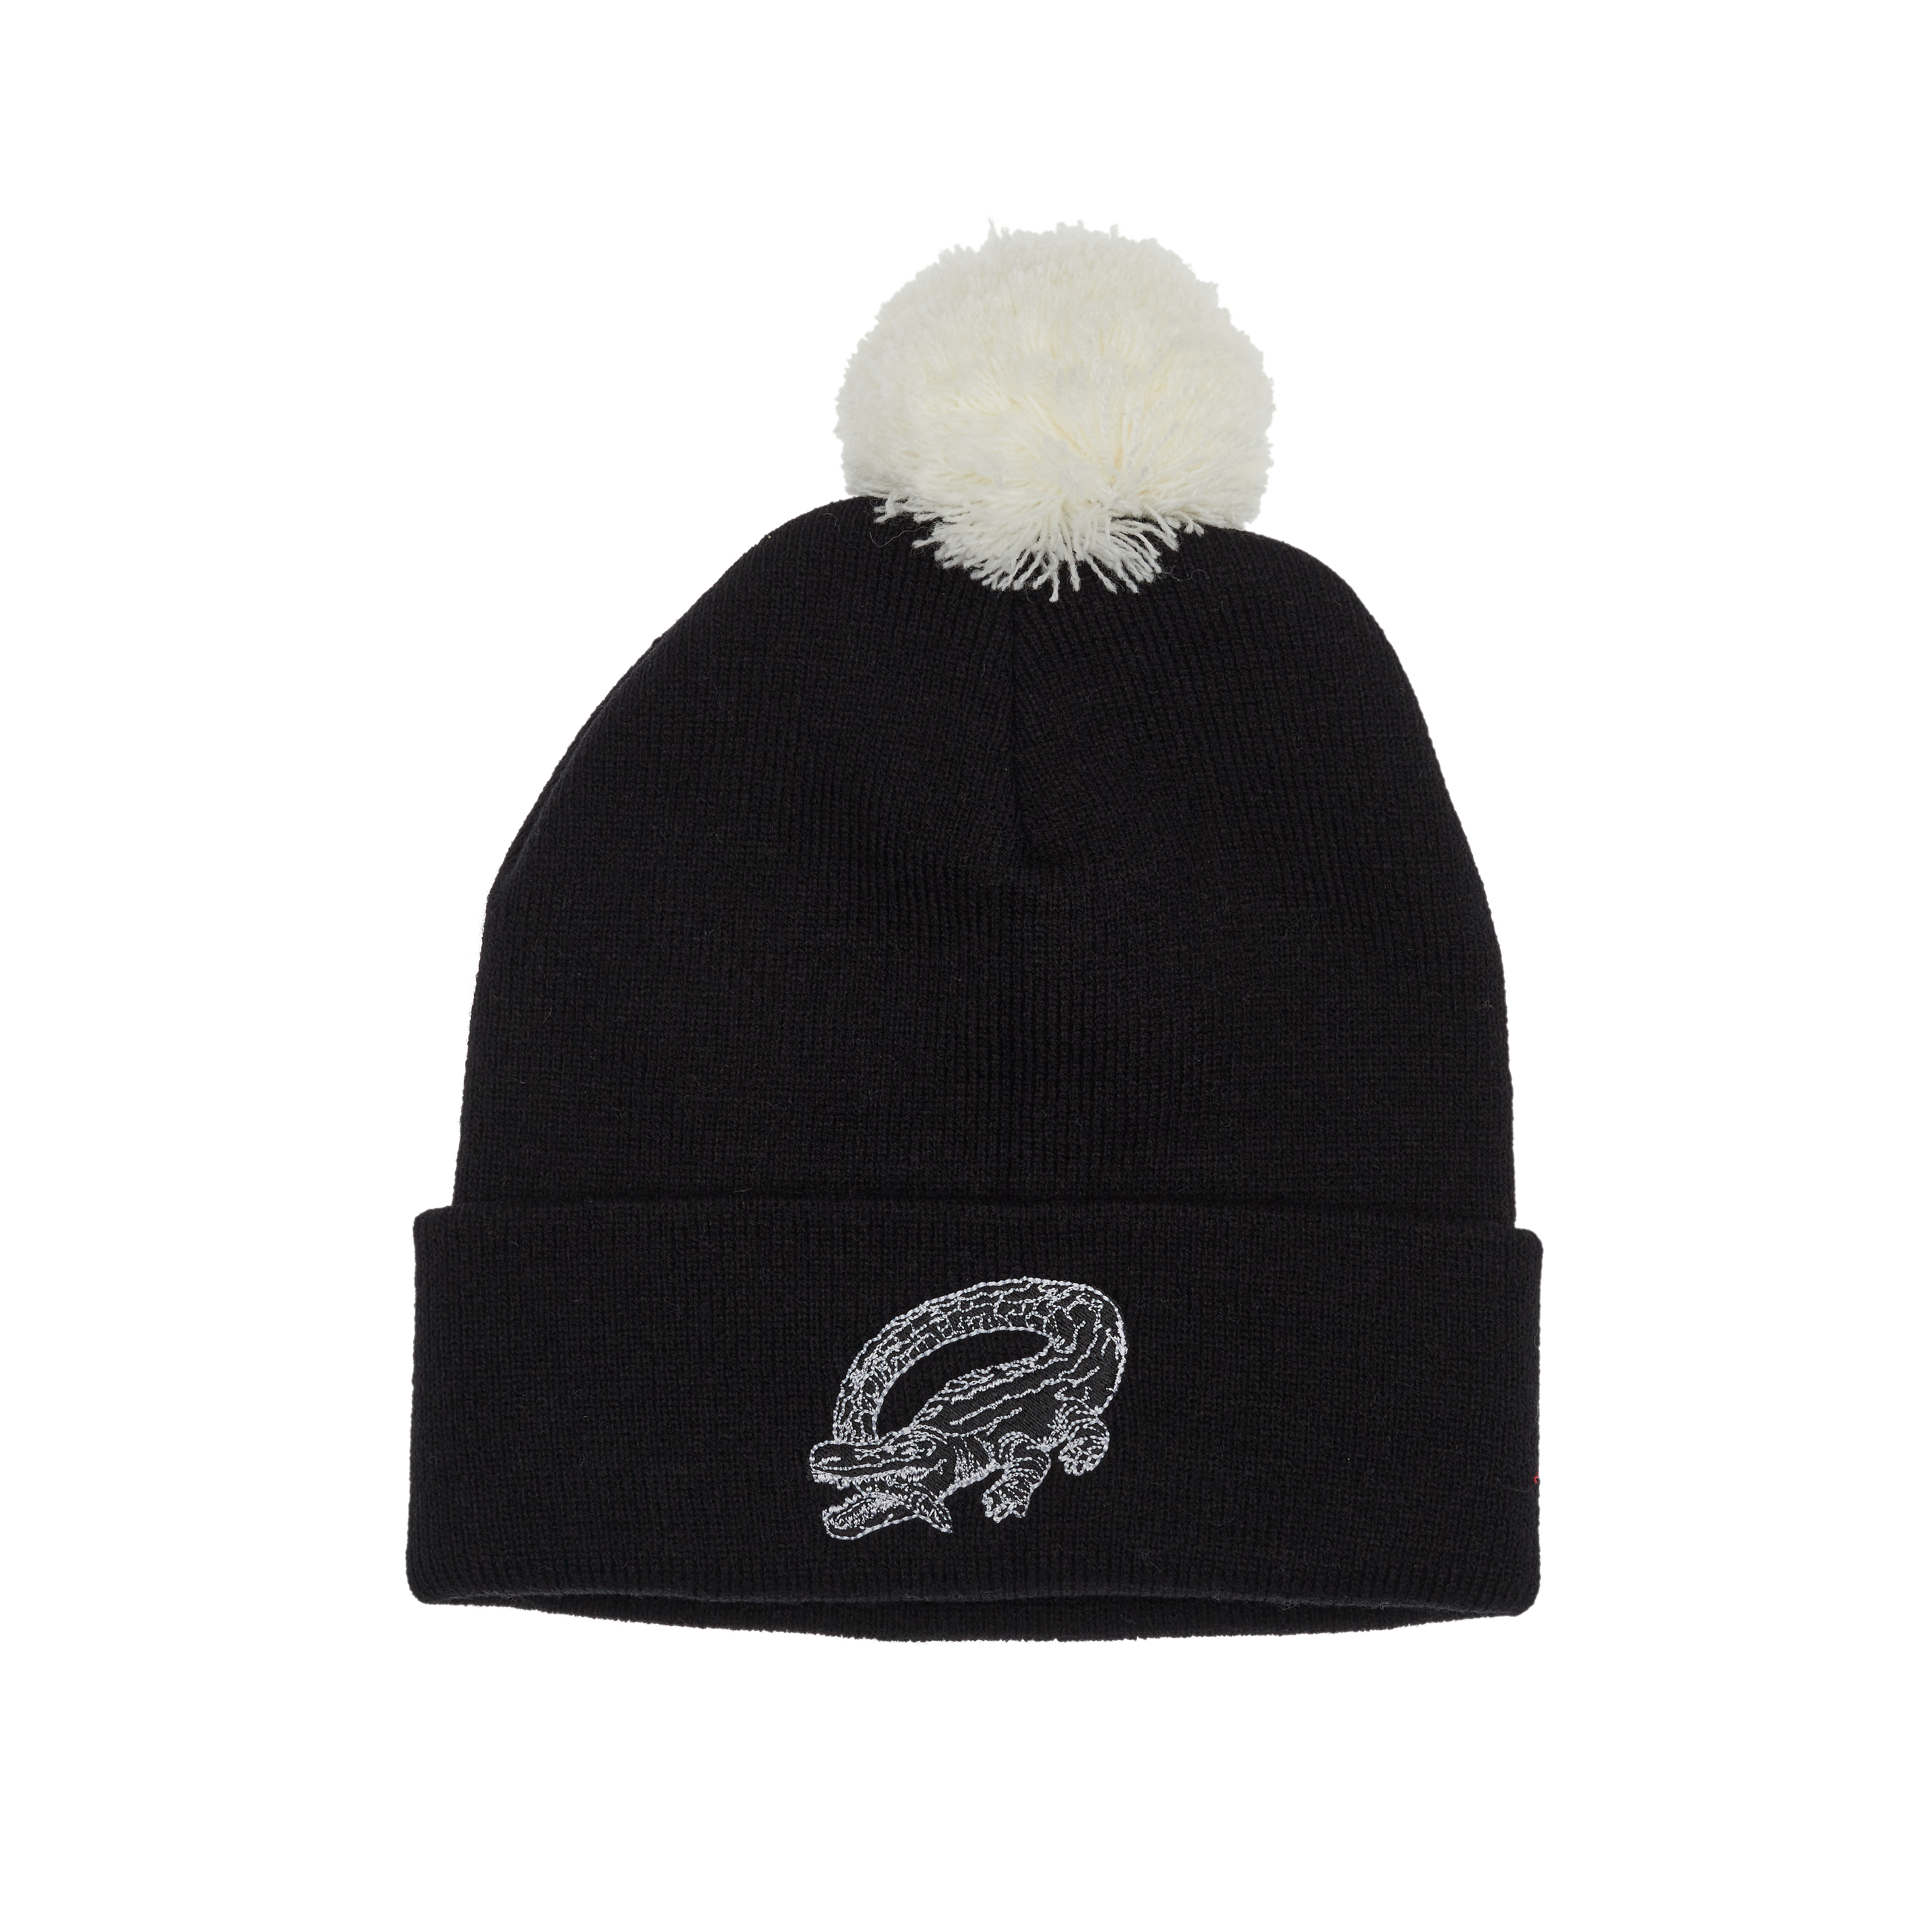 Catfish and the Bottlemen - The Ride Beanie With White Bobble